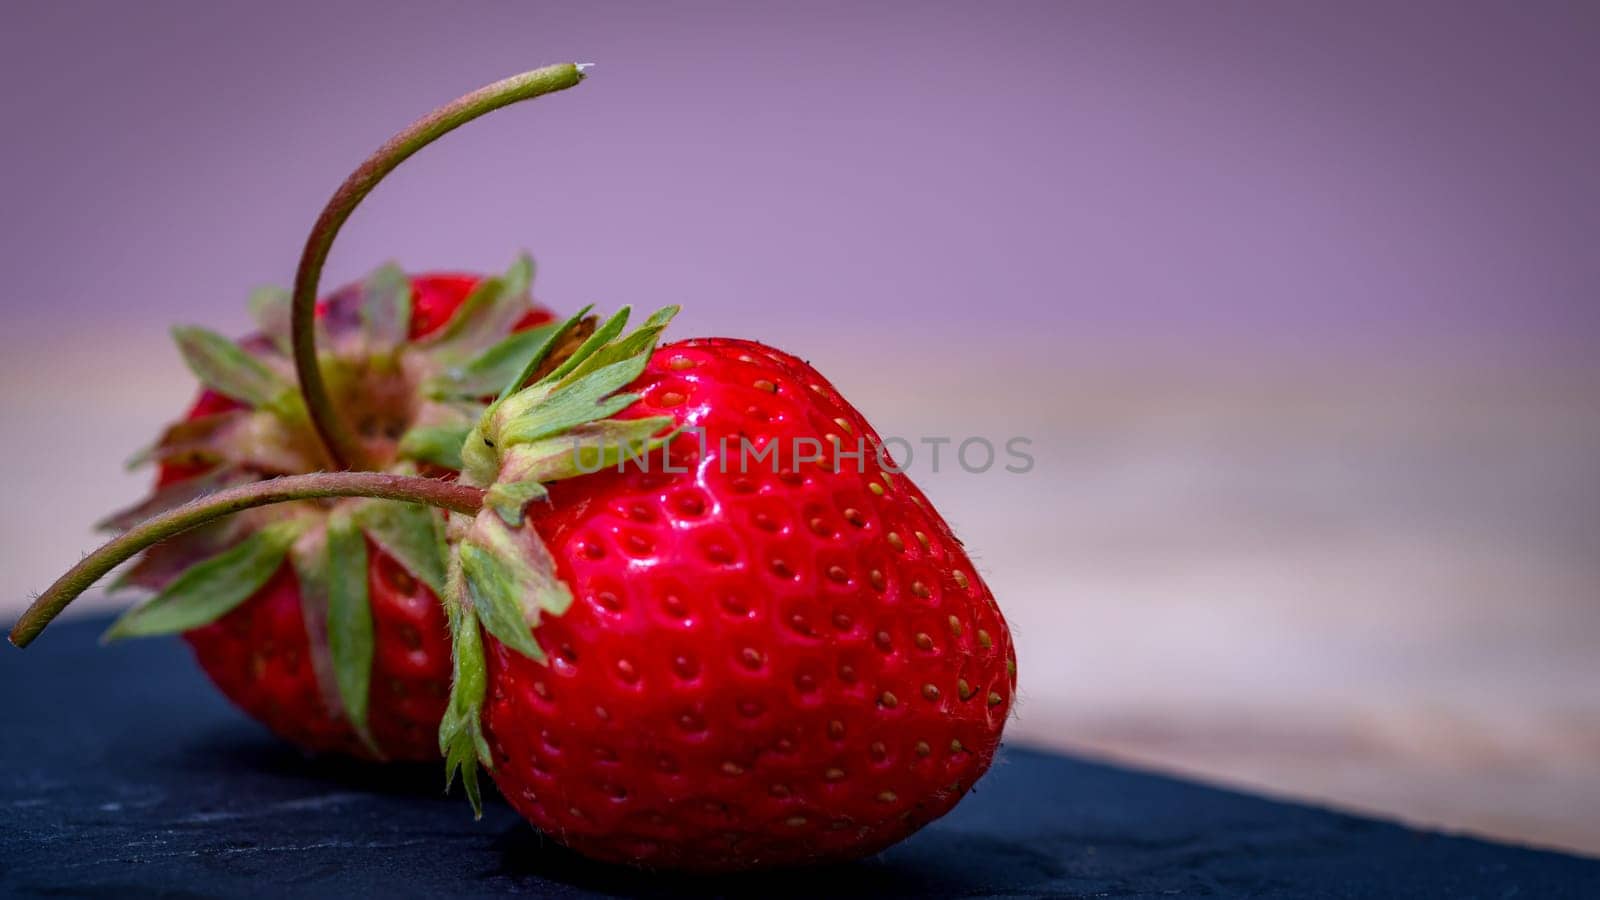 Close up of two strawberries on small black cutting board isolated outdoor on wooden table.